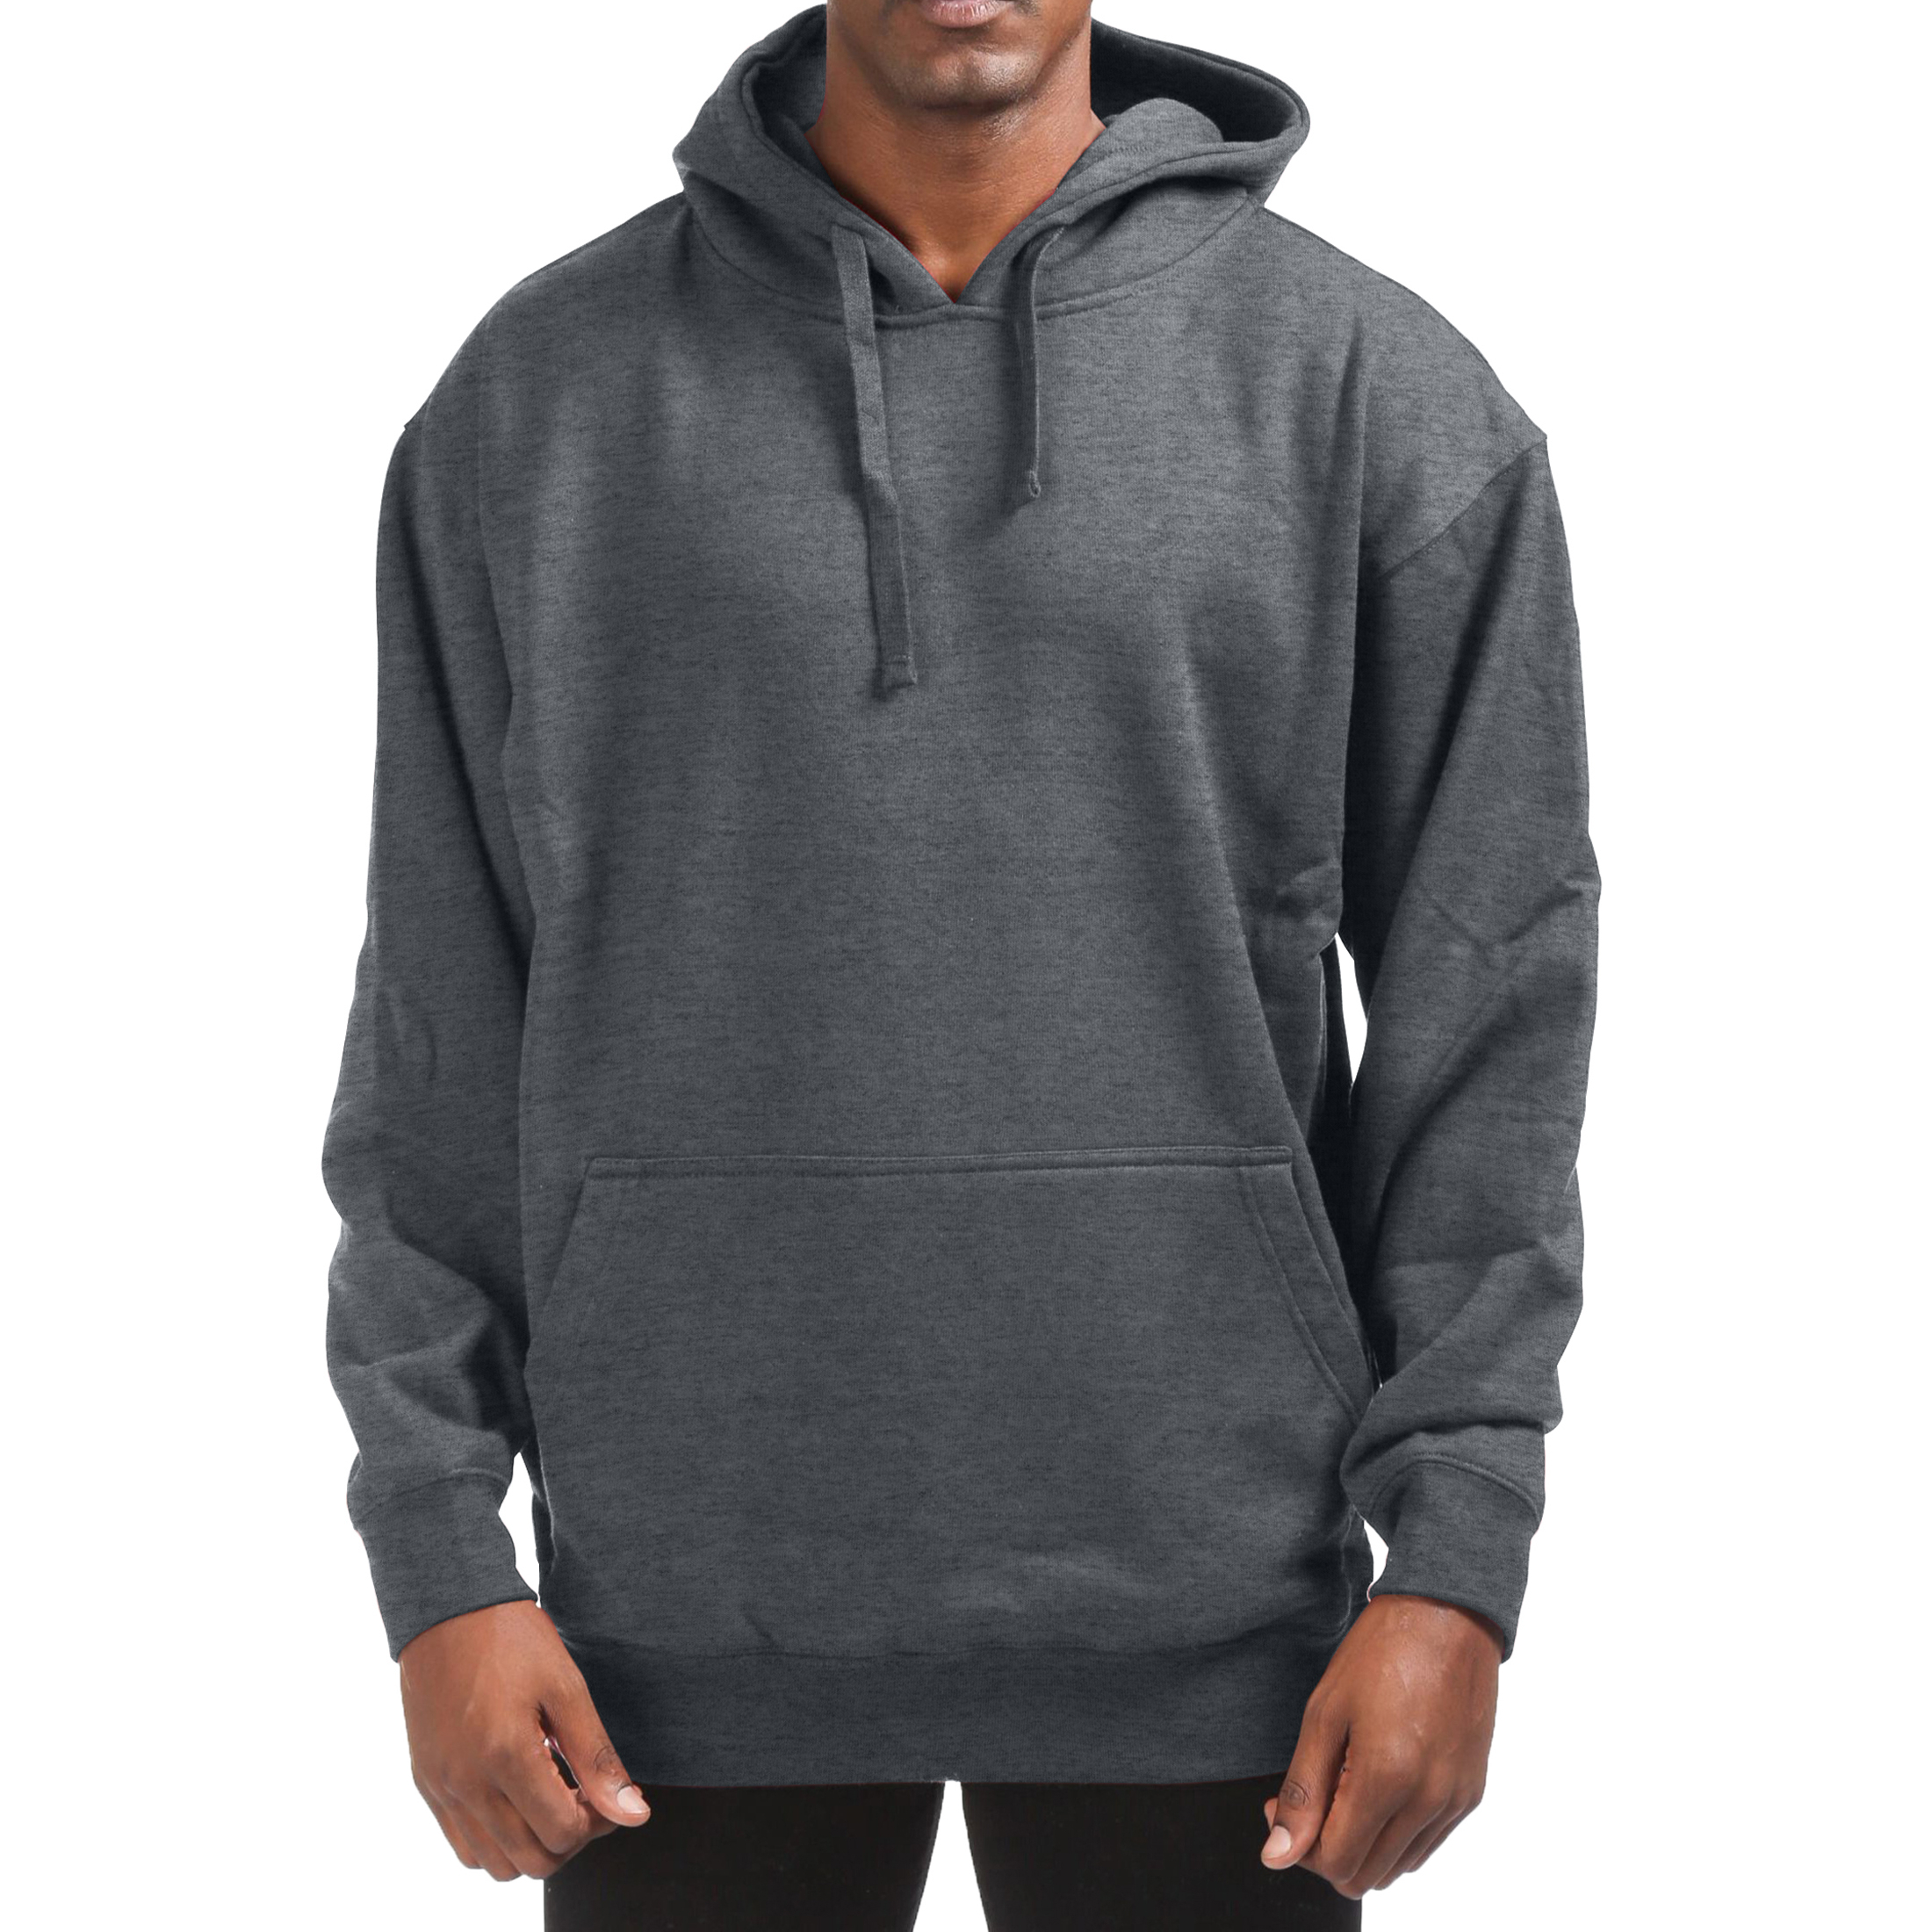 Men's Cotton-Blend Fleece Pullover Hoodie With Pocket (Big & Tall Sizes Available) - Charcoal, Large